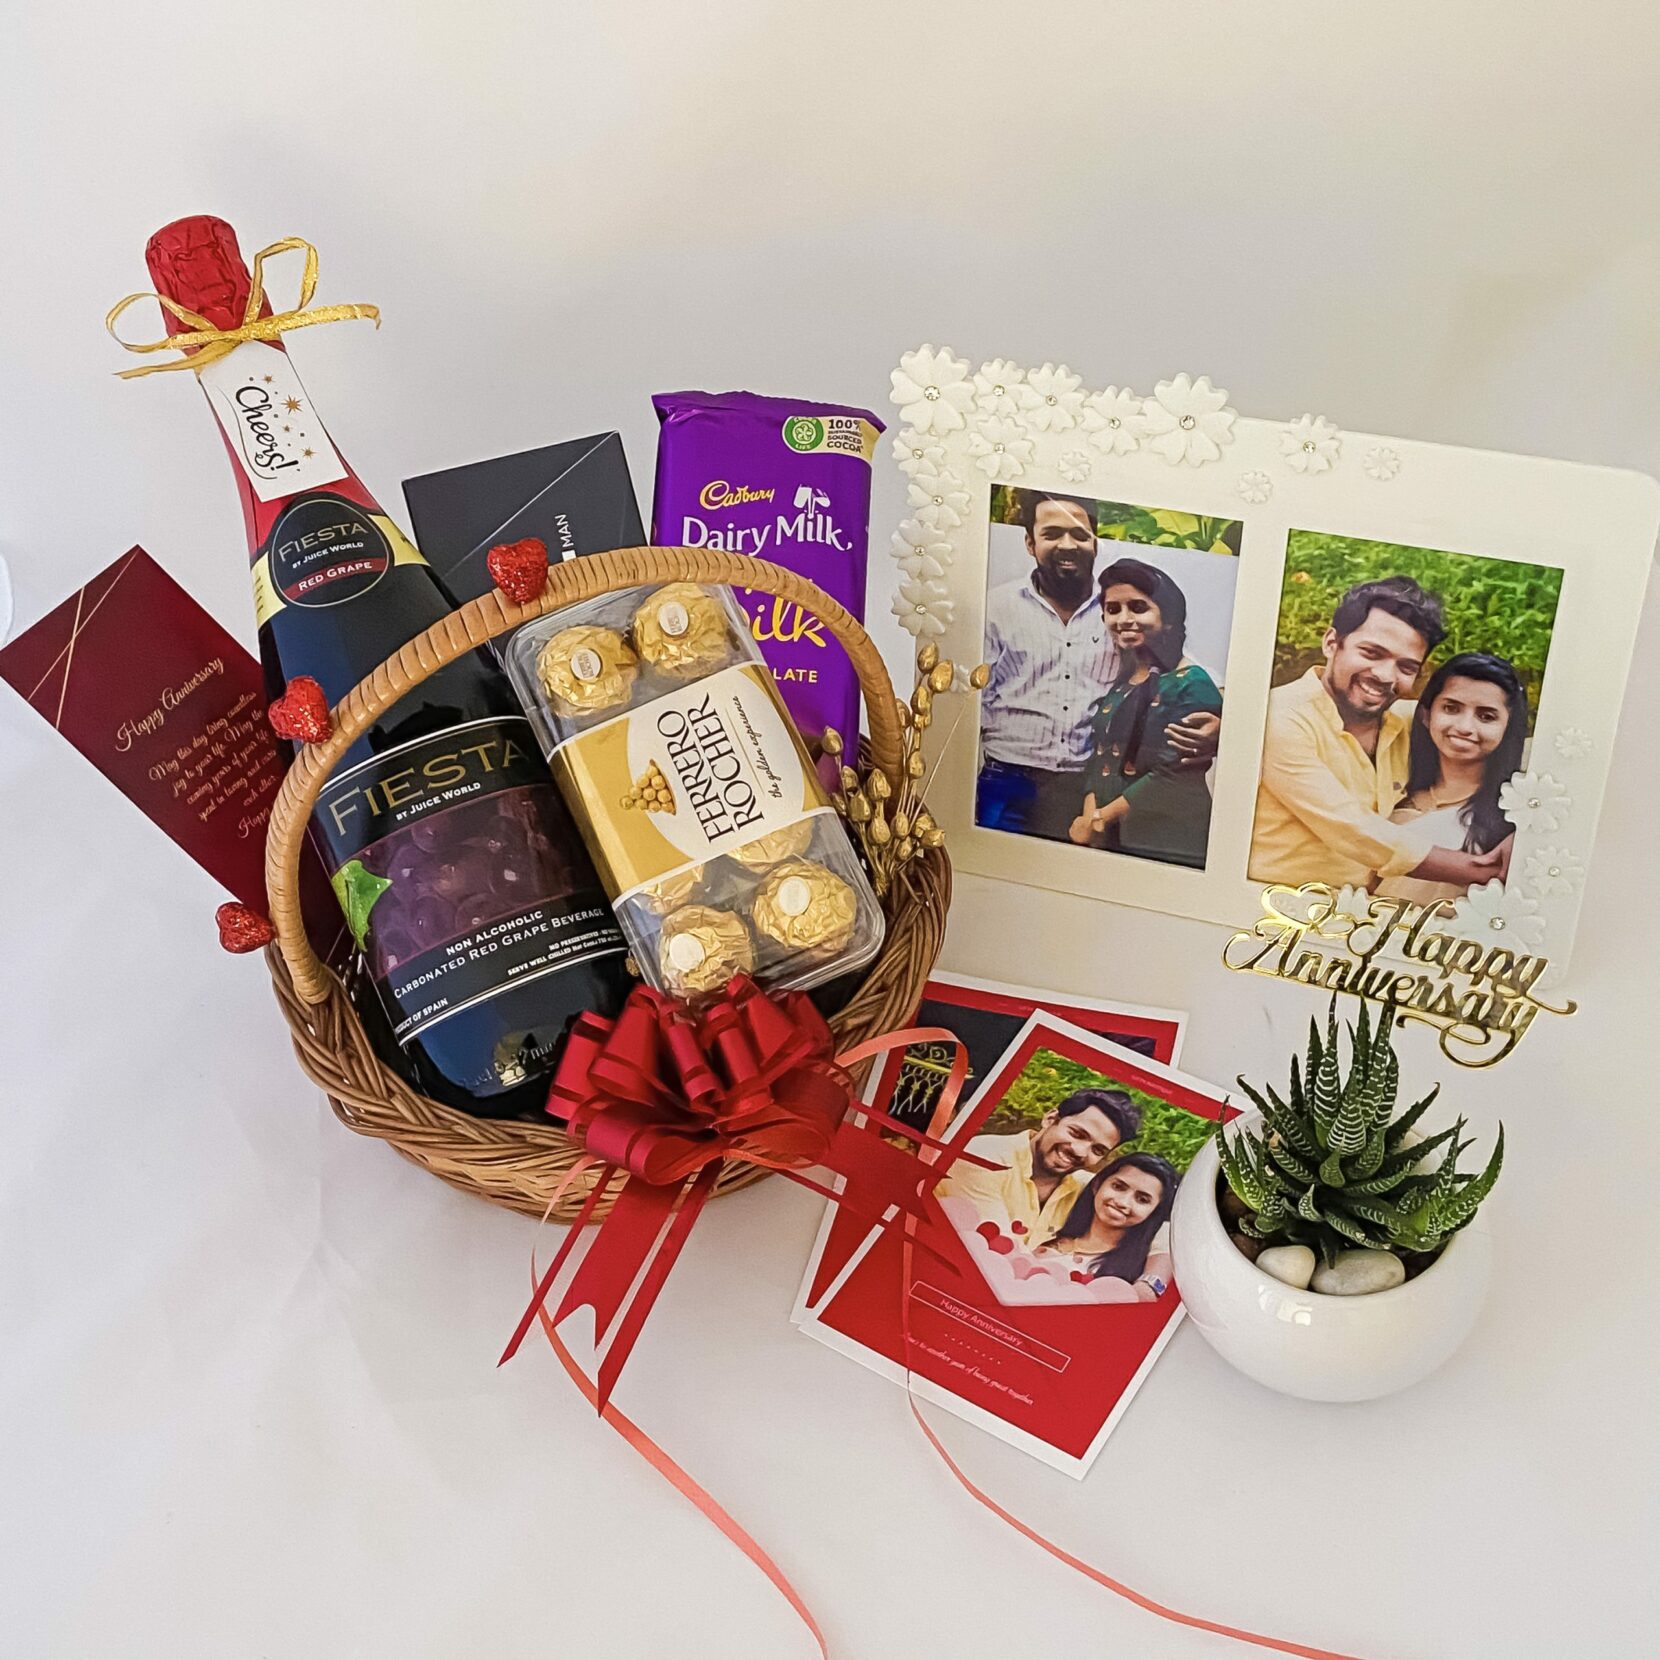 Best Wedding Anniversary Gifts For Him | Romantic Gift Ideas